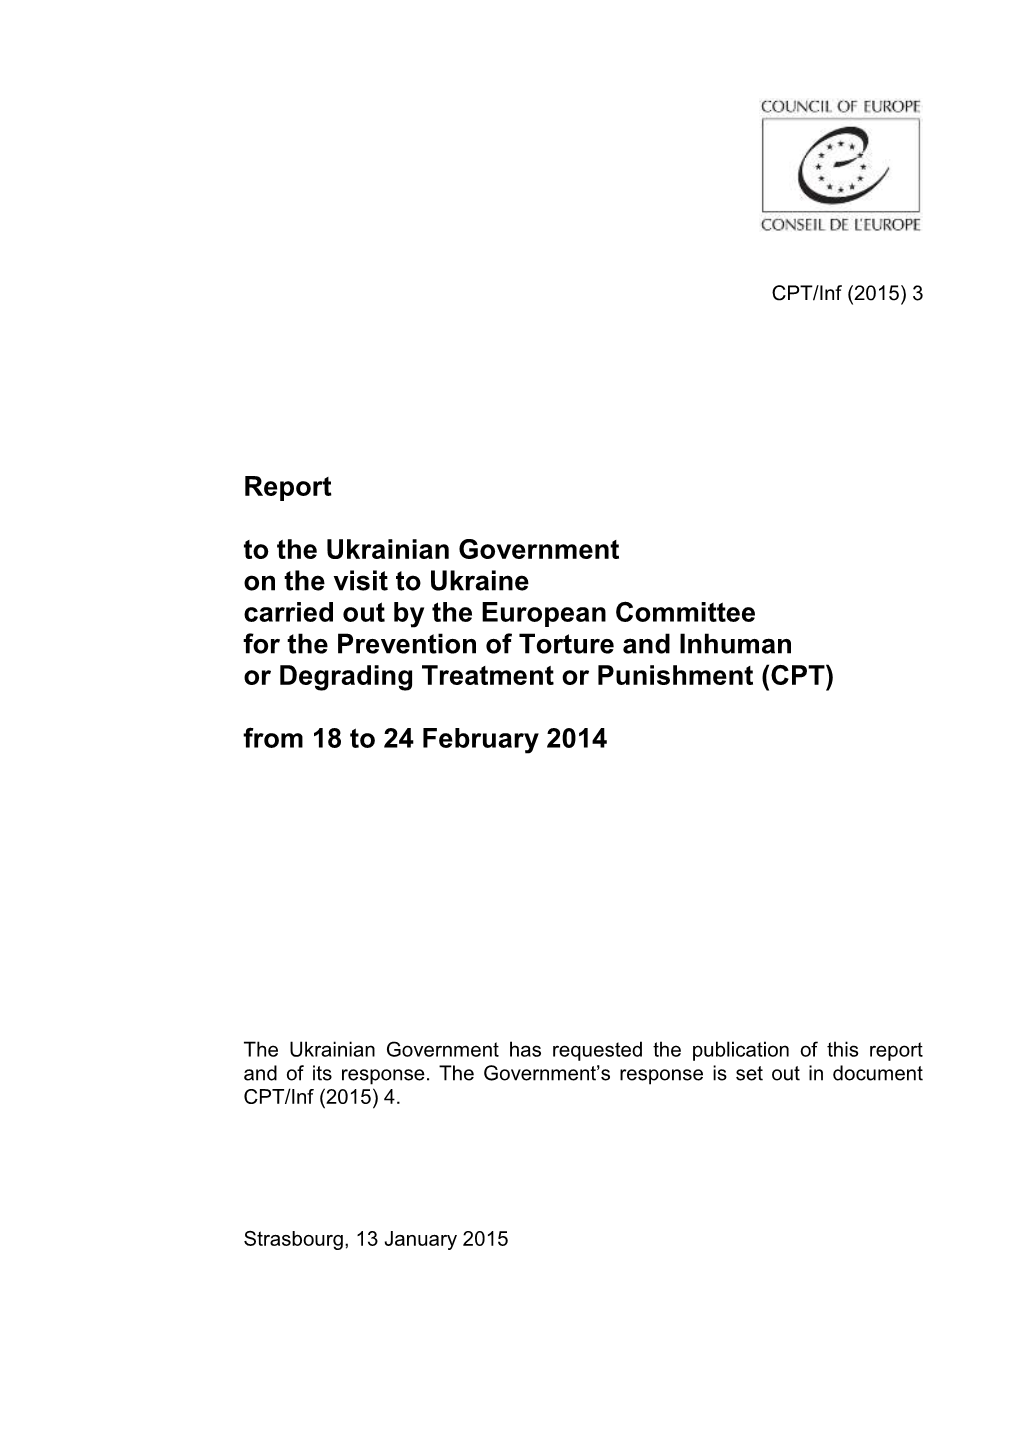 Report to the Ukrainian Government on the Visit to Ukraine